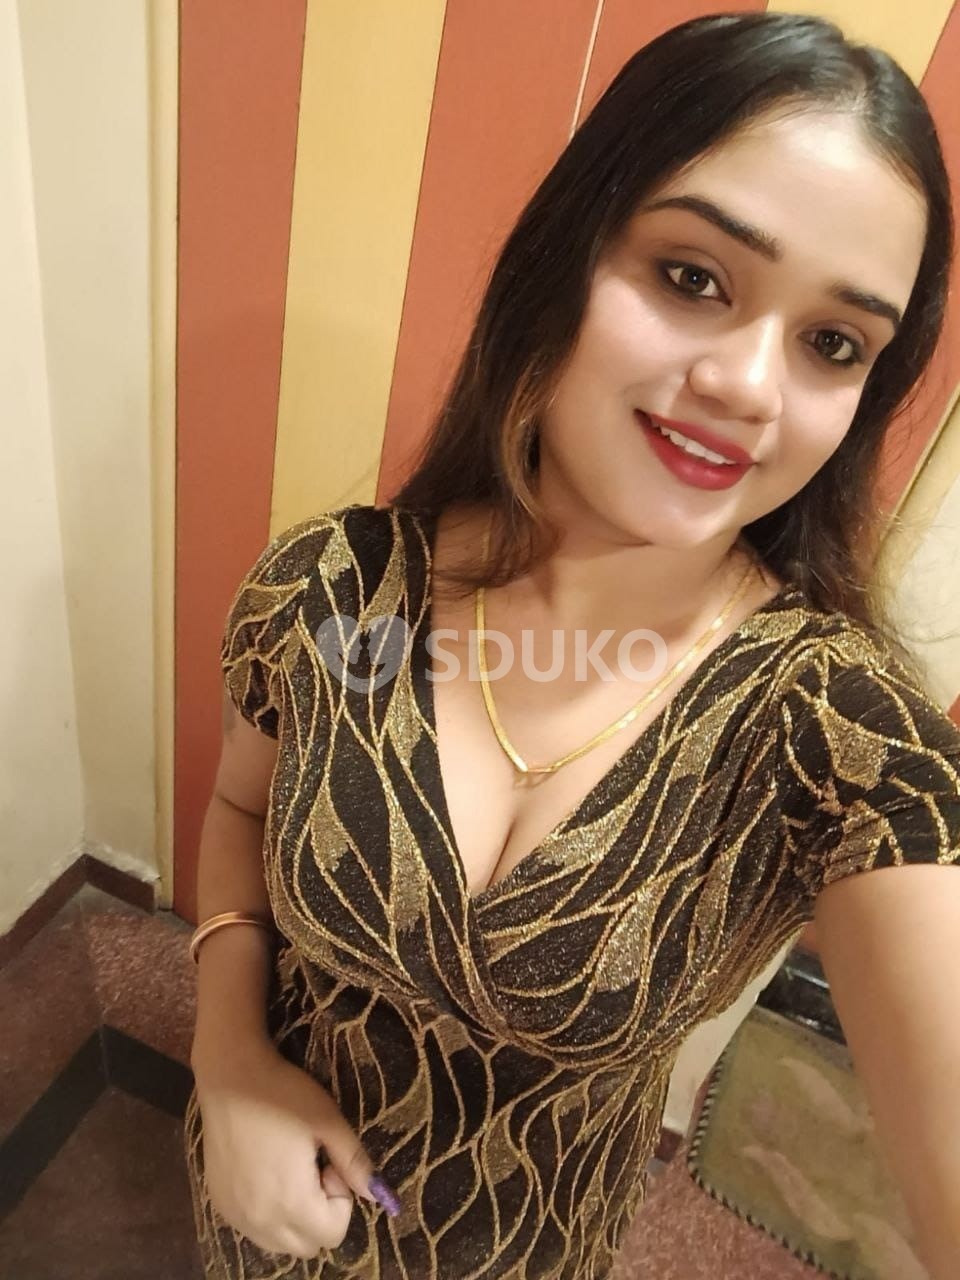 Bhiwandi...👉 🆑Low price 100%;:::genuine👥sexy VIP call girls are provided👌 safe and secure service .call 📞